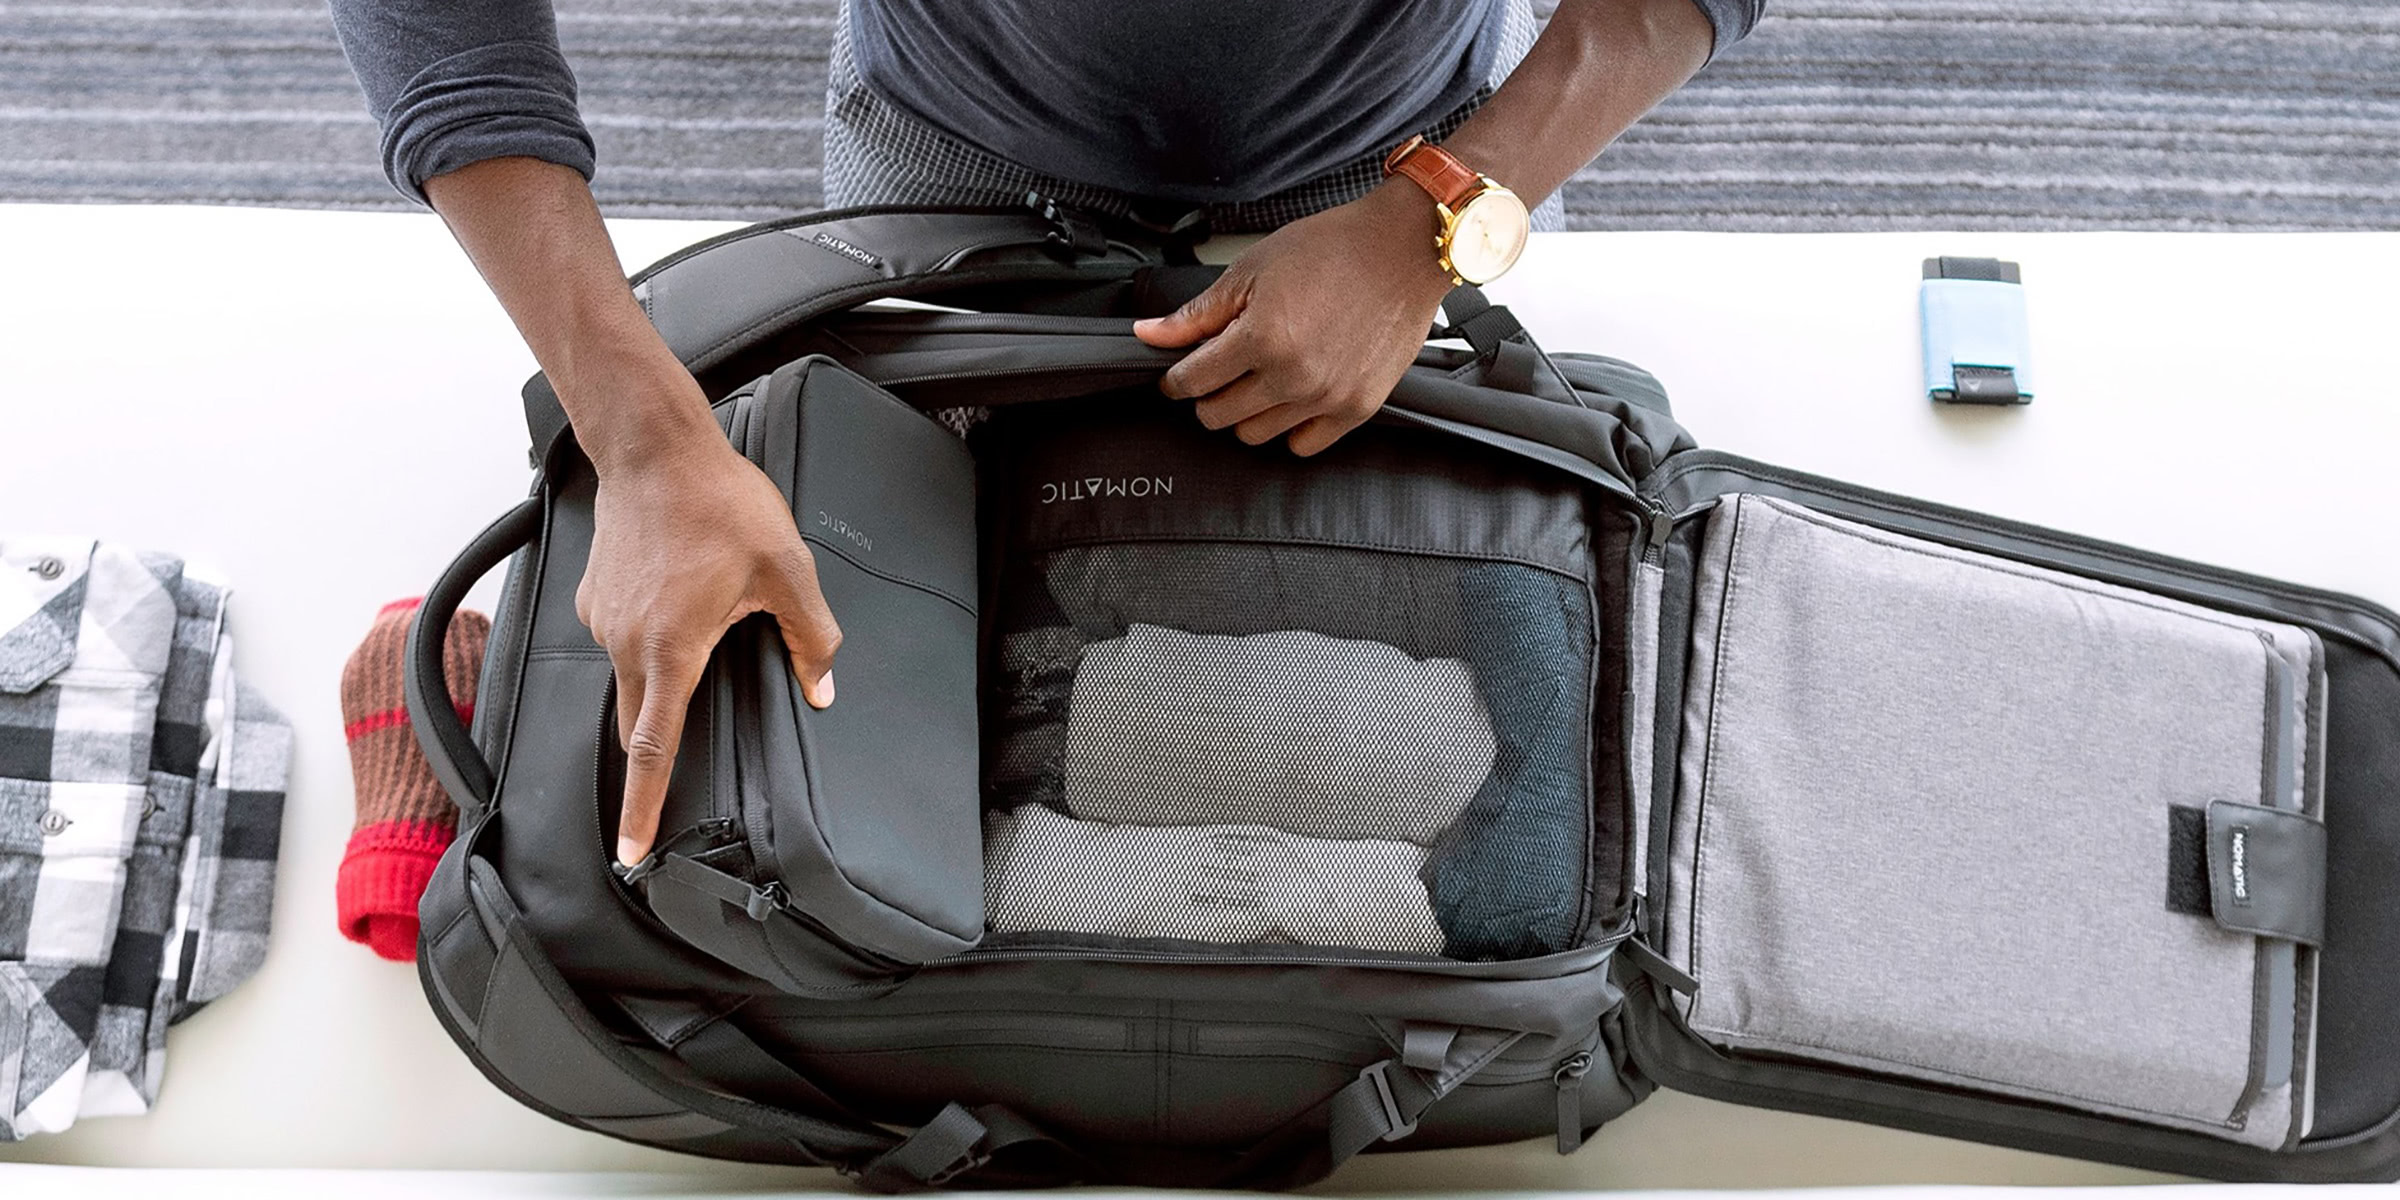 Packing Cubes: The Travel Accessory To Pack Like A Pro